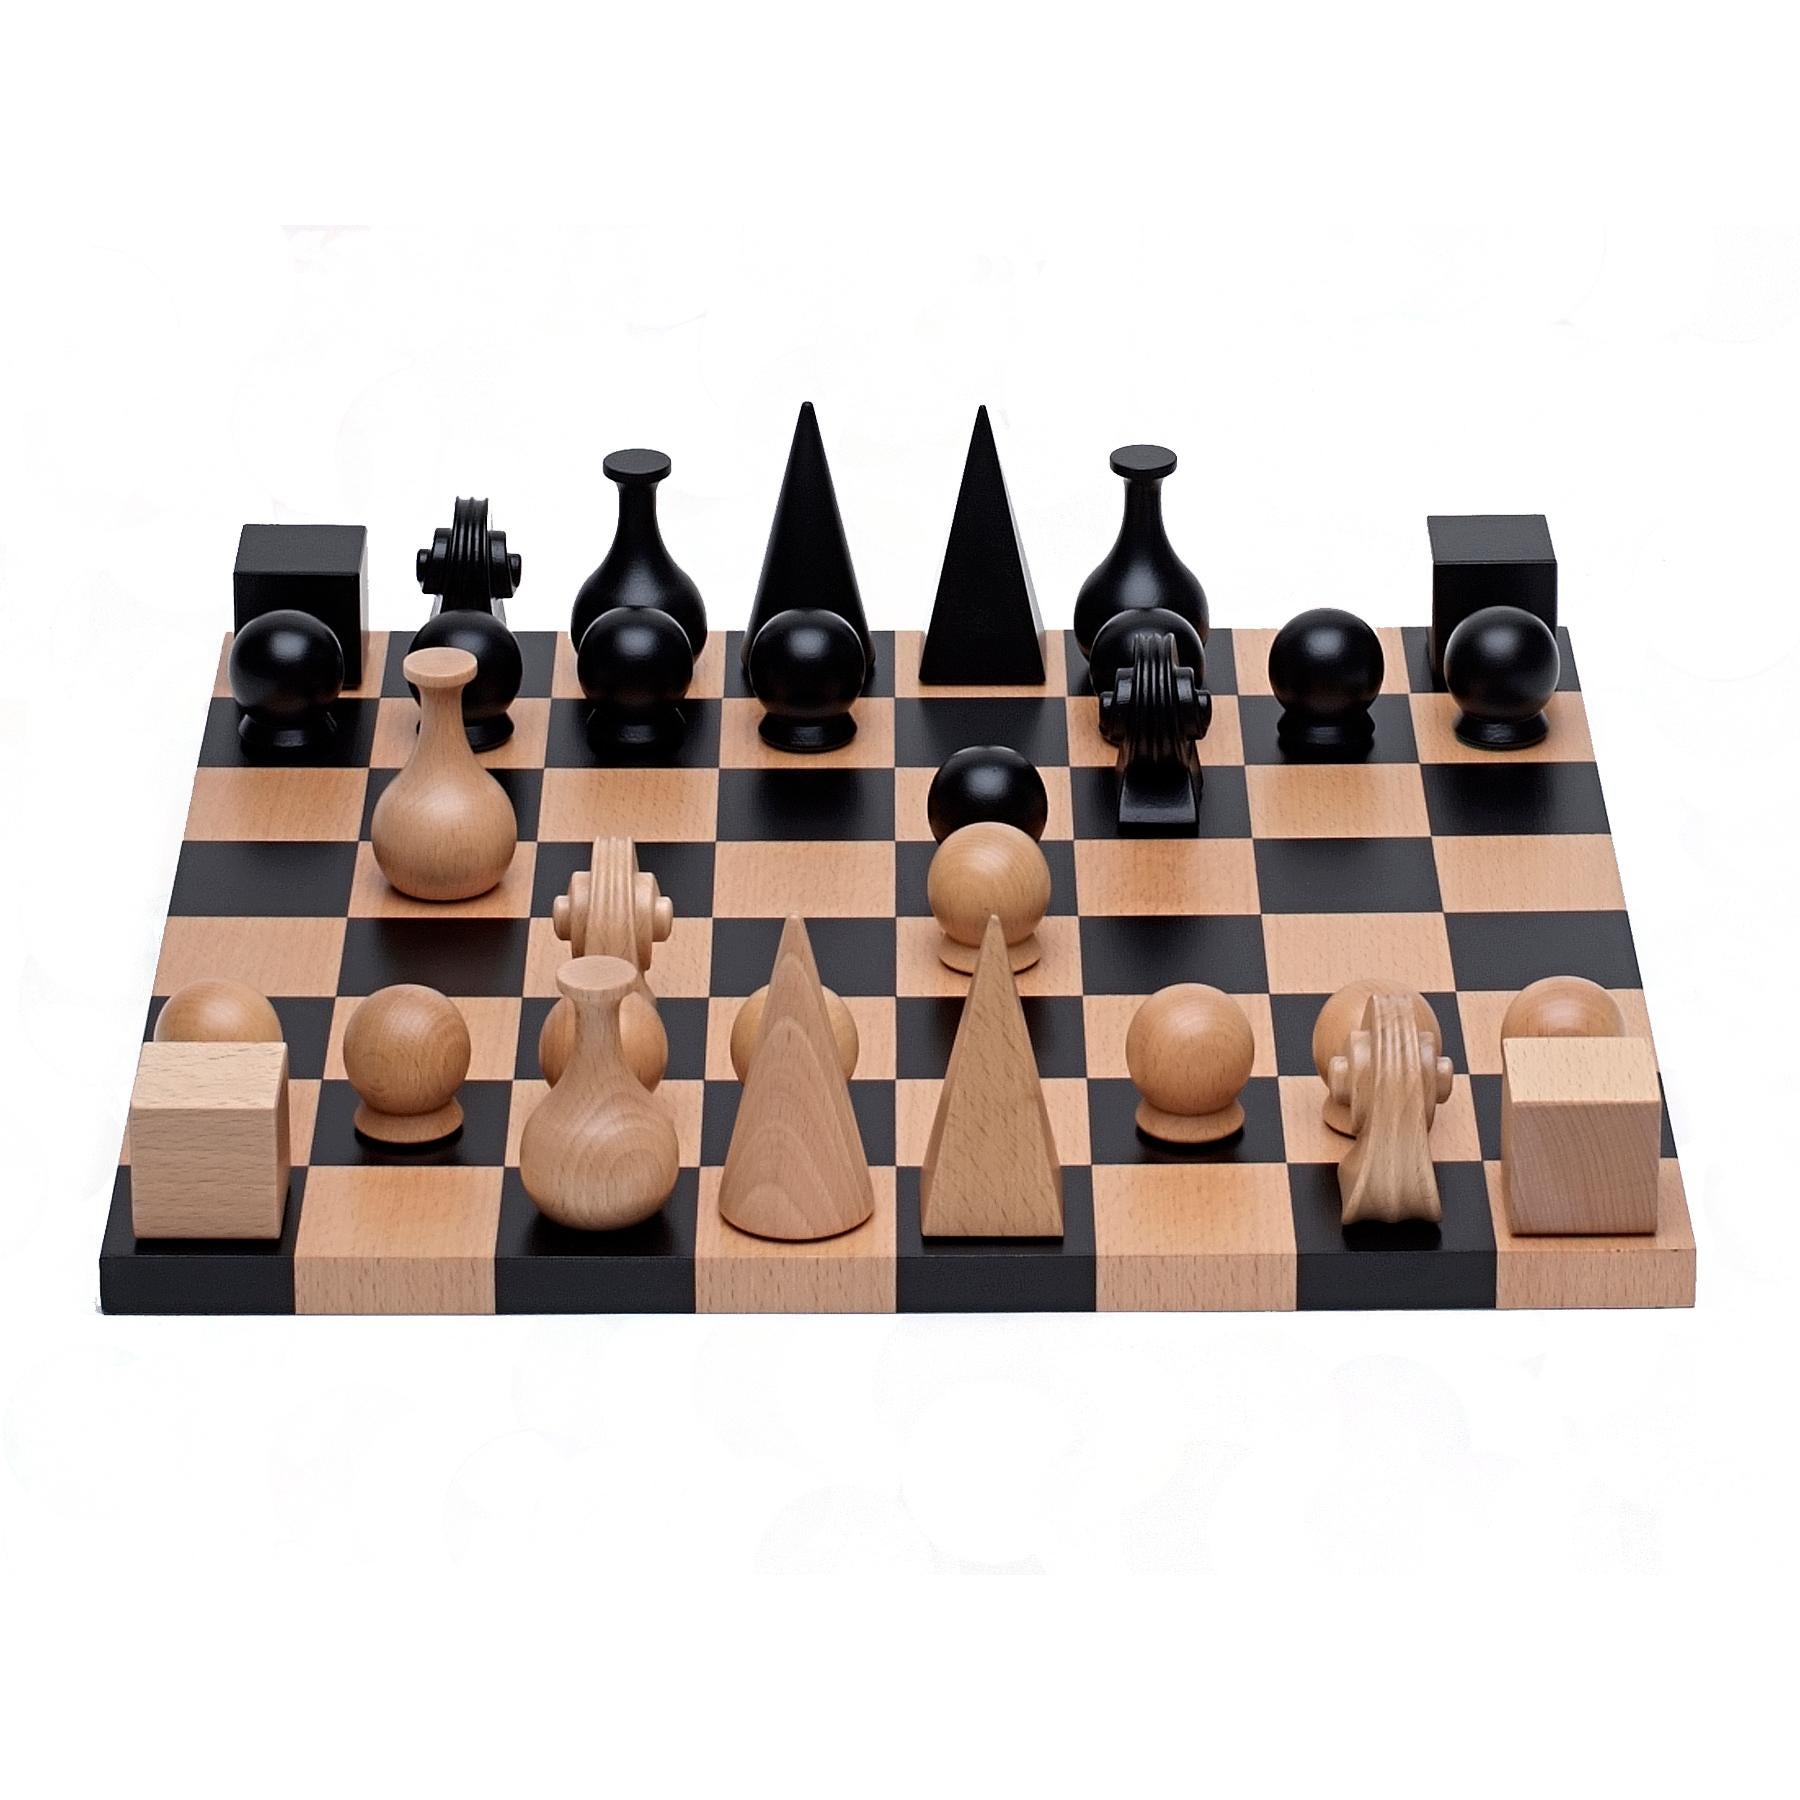 Chess Set (32 pieces) with board
re-edition based on 1920 design
carved solid beech wood
tallest piece is 2